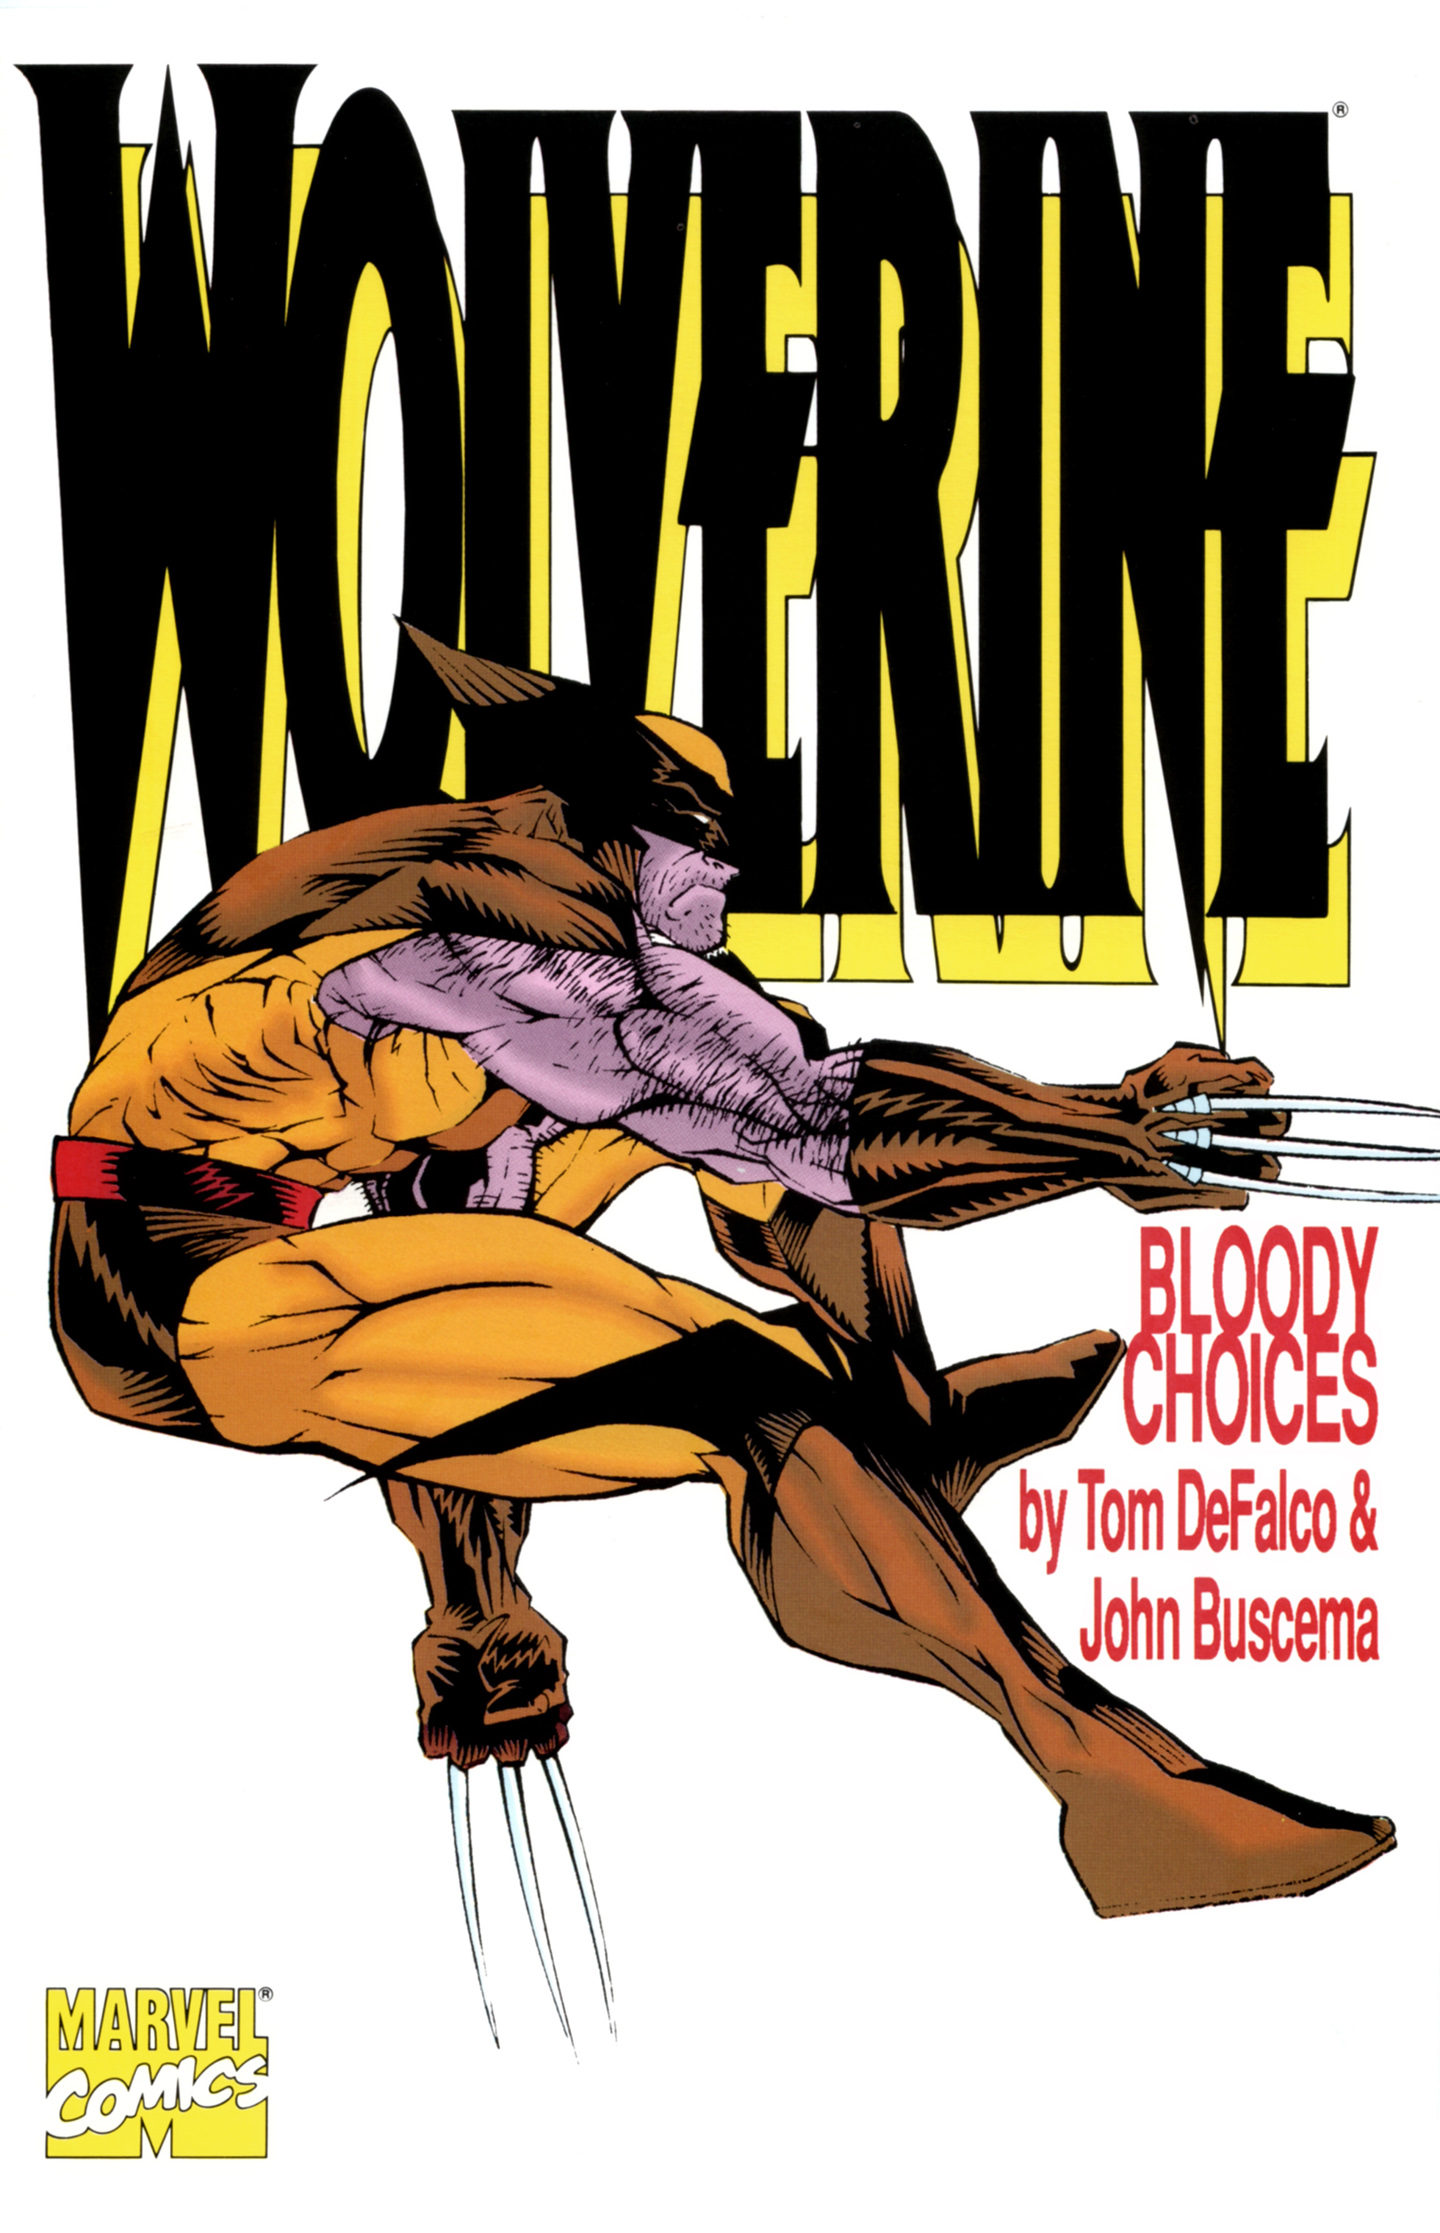 Read online Wolverine: Bloody Choices comic -  Issue # Full - 1